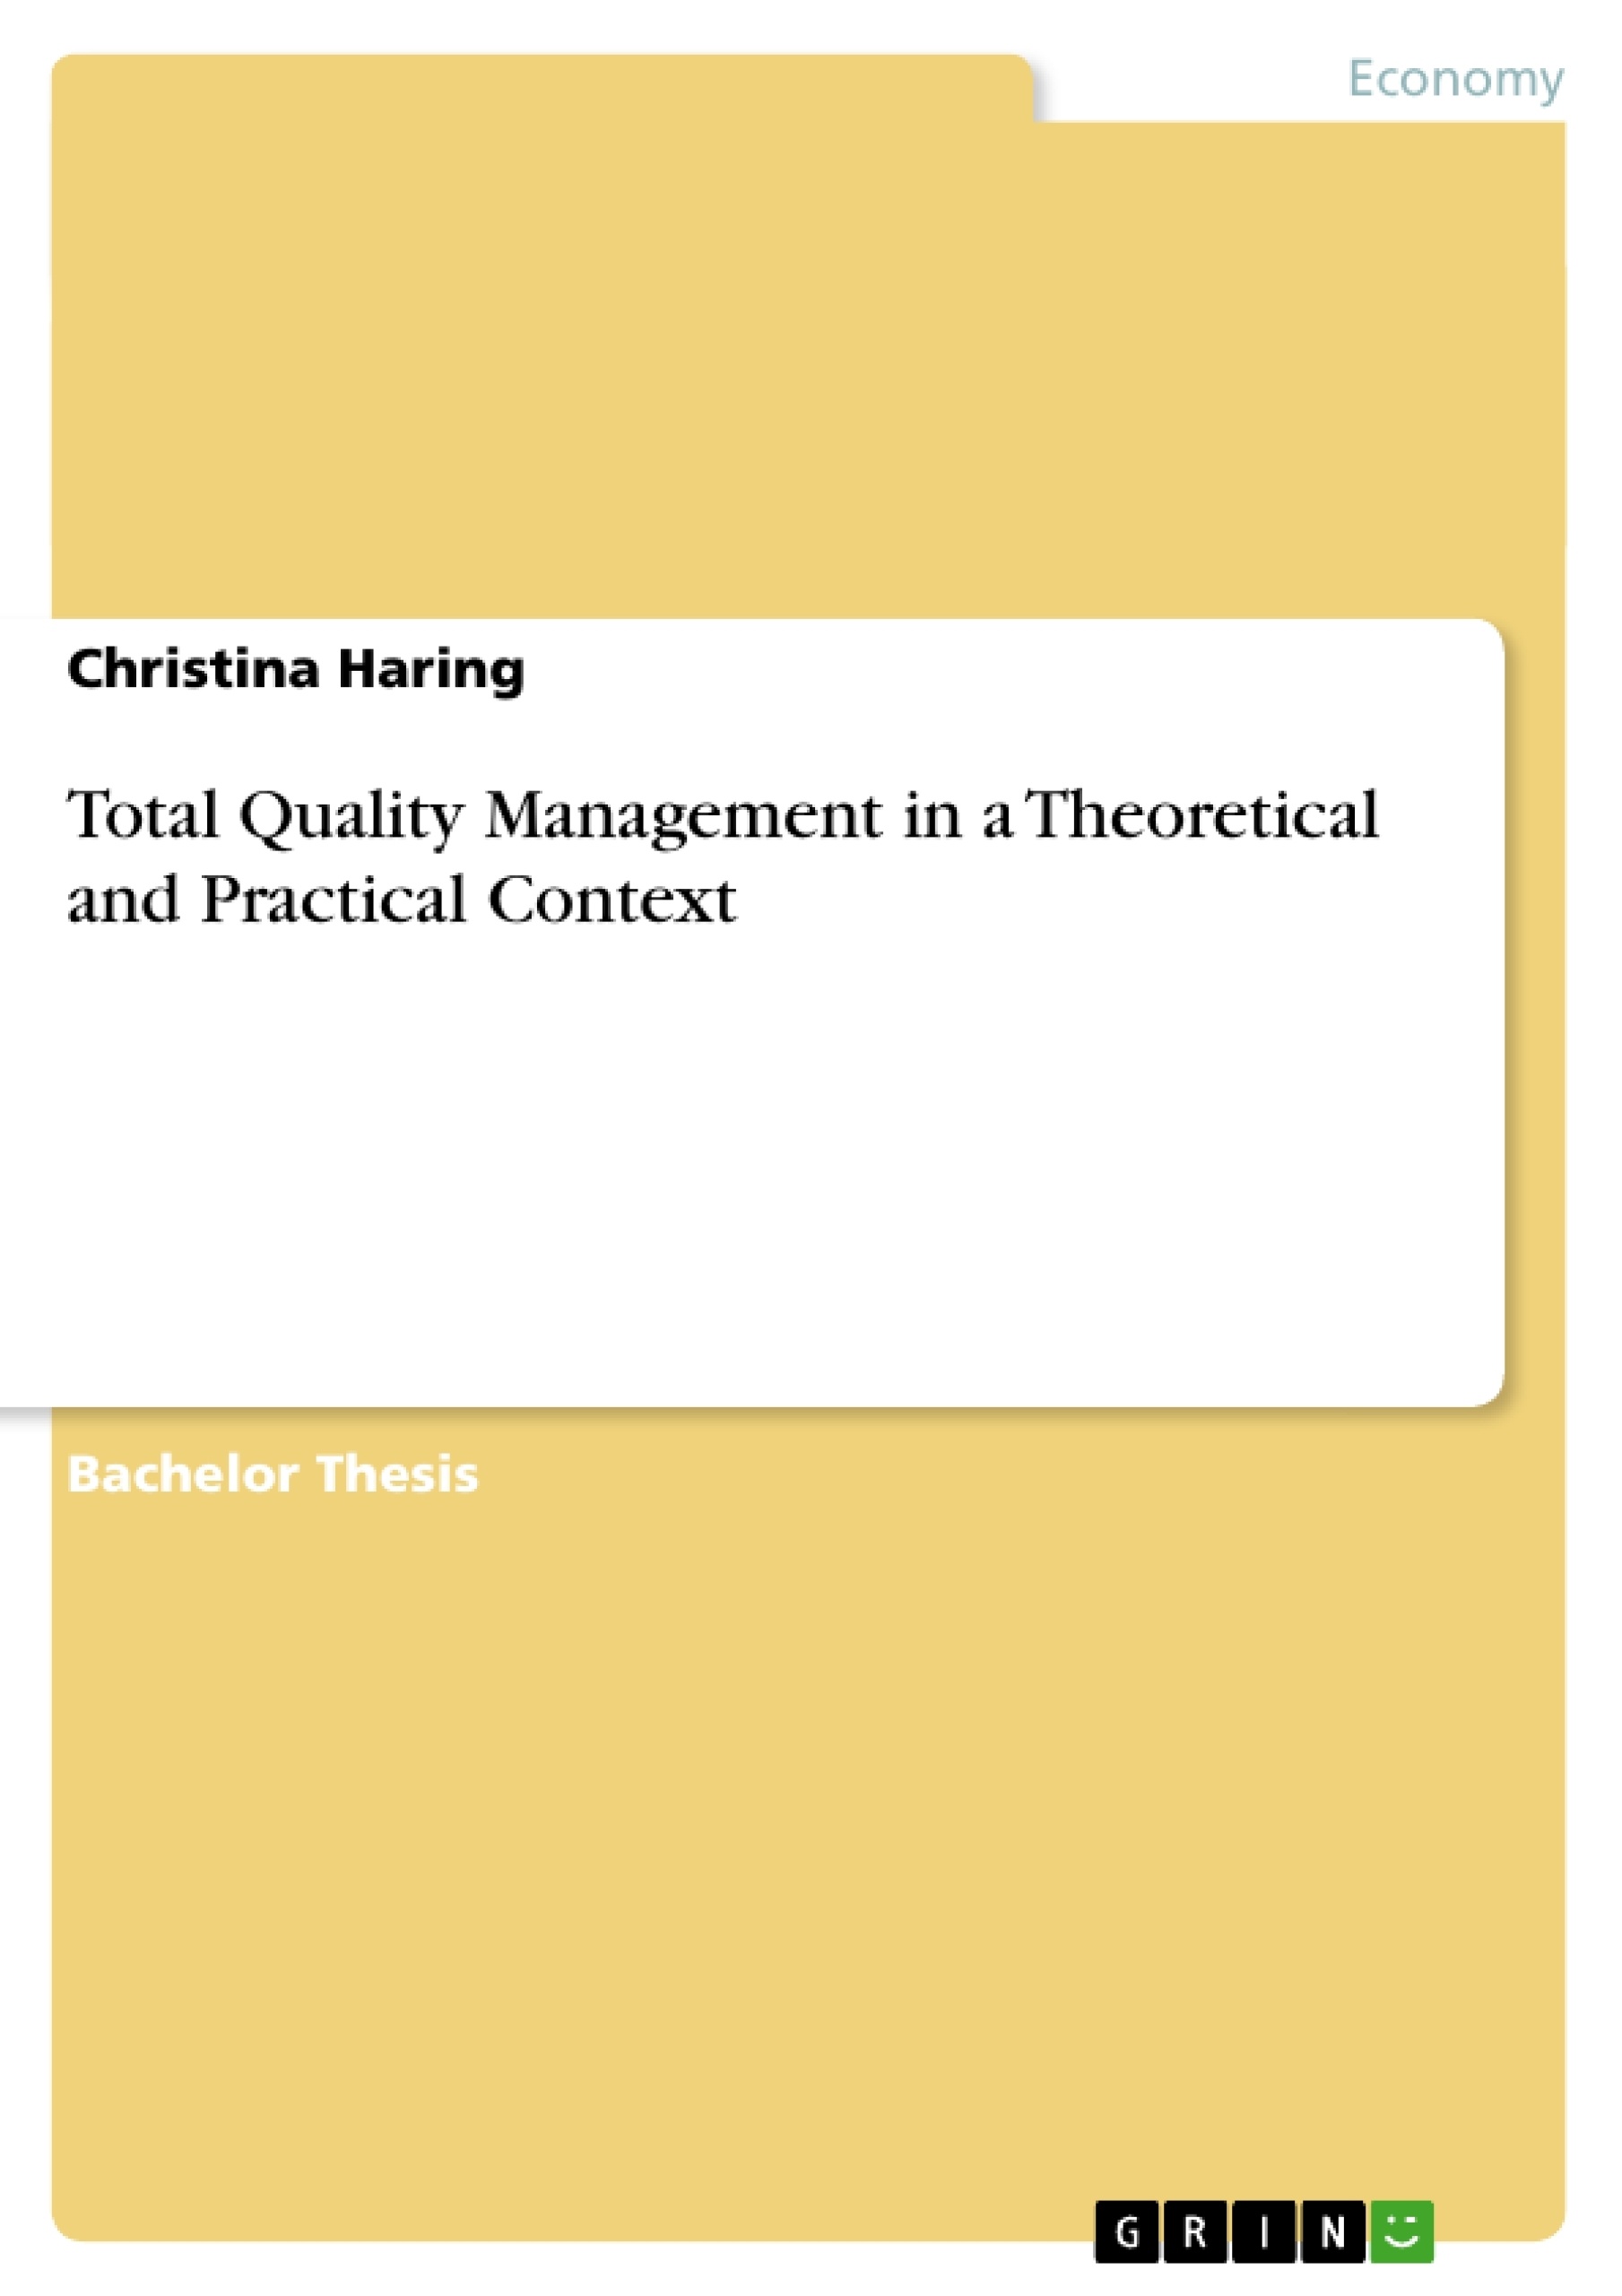 Title: Total Quality Management in a Theoretical and Practical Context